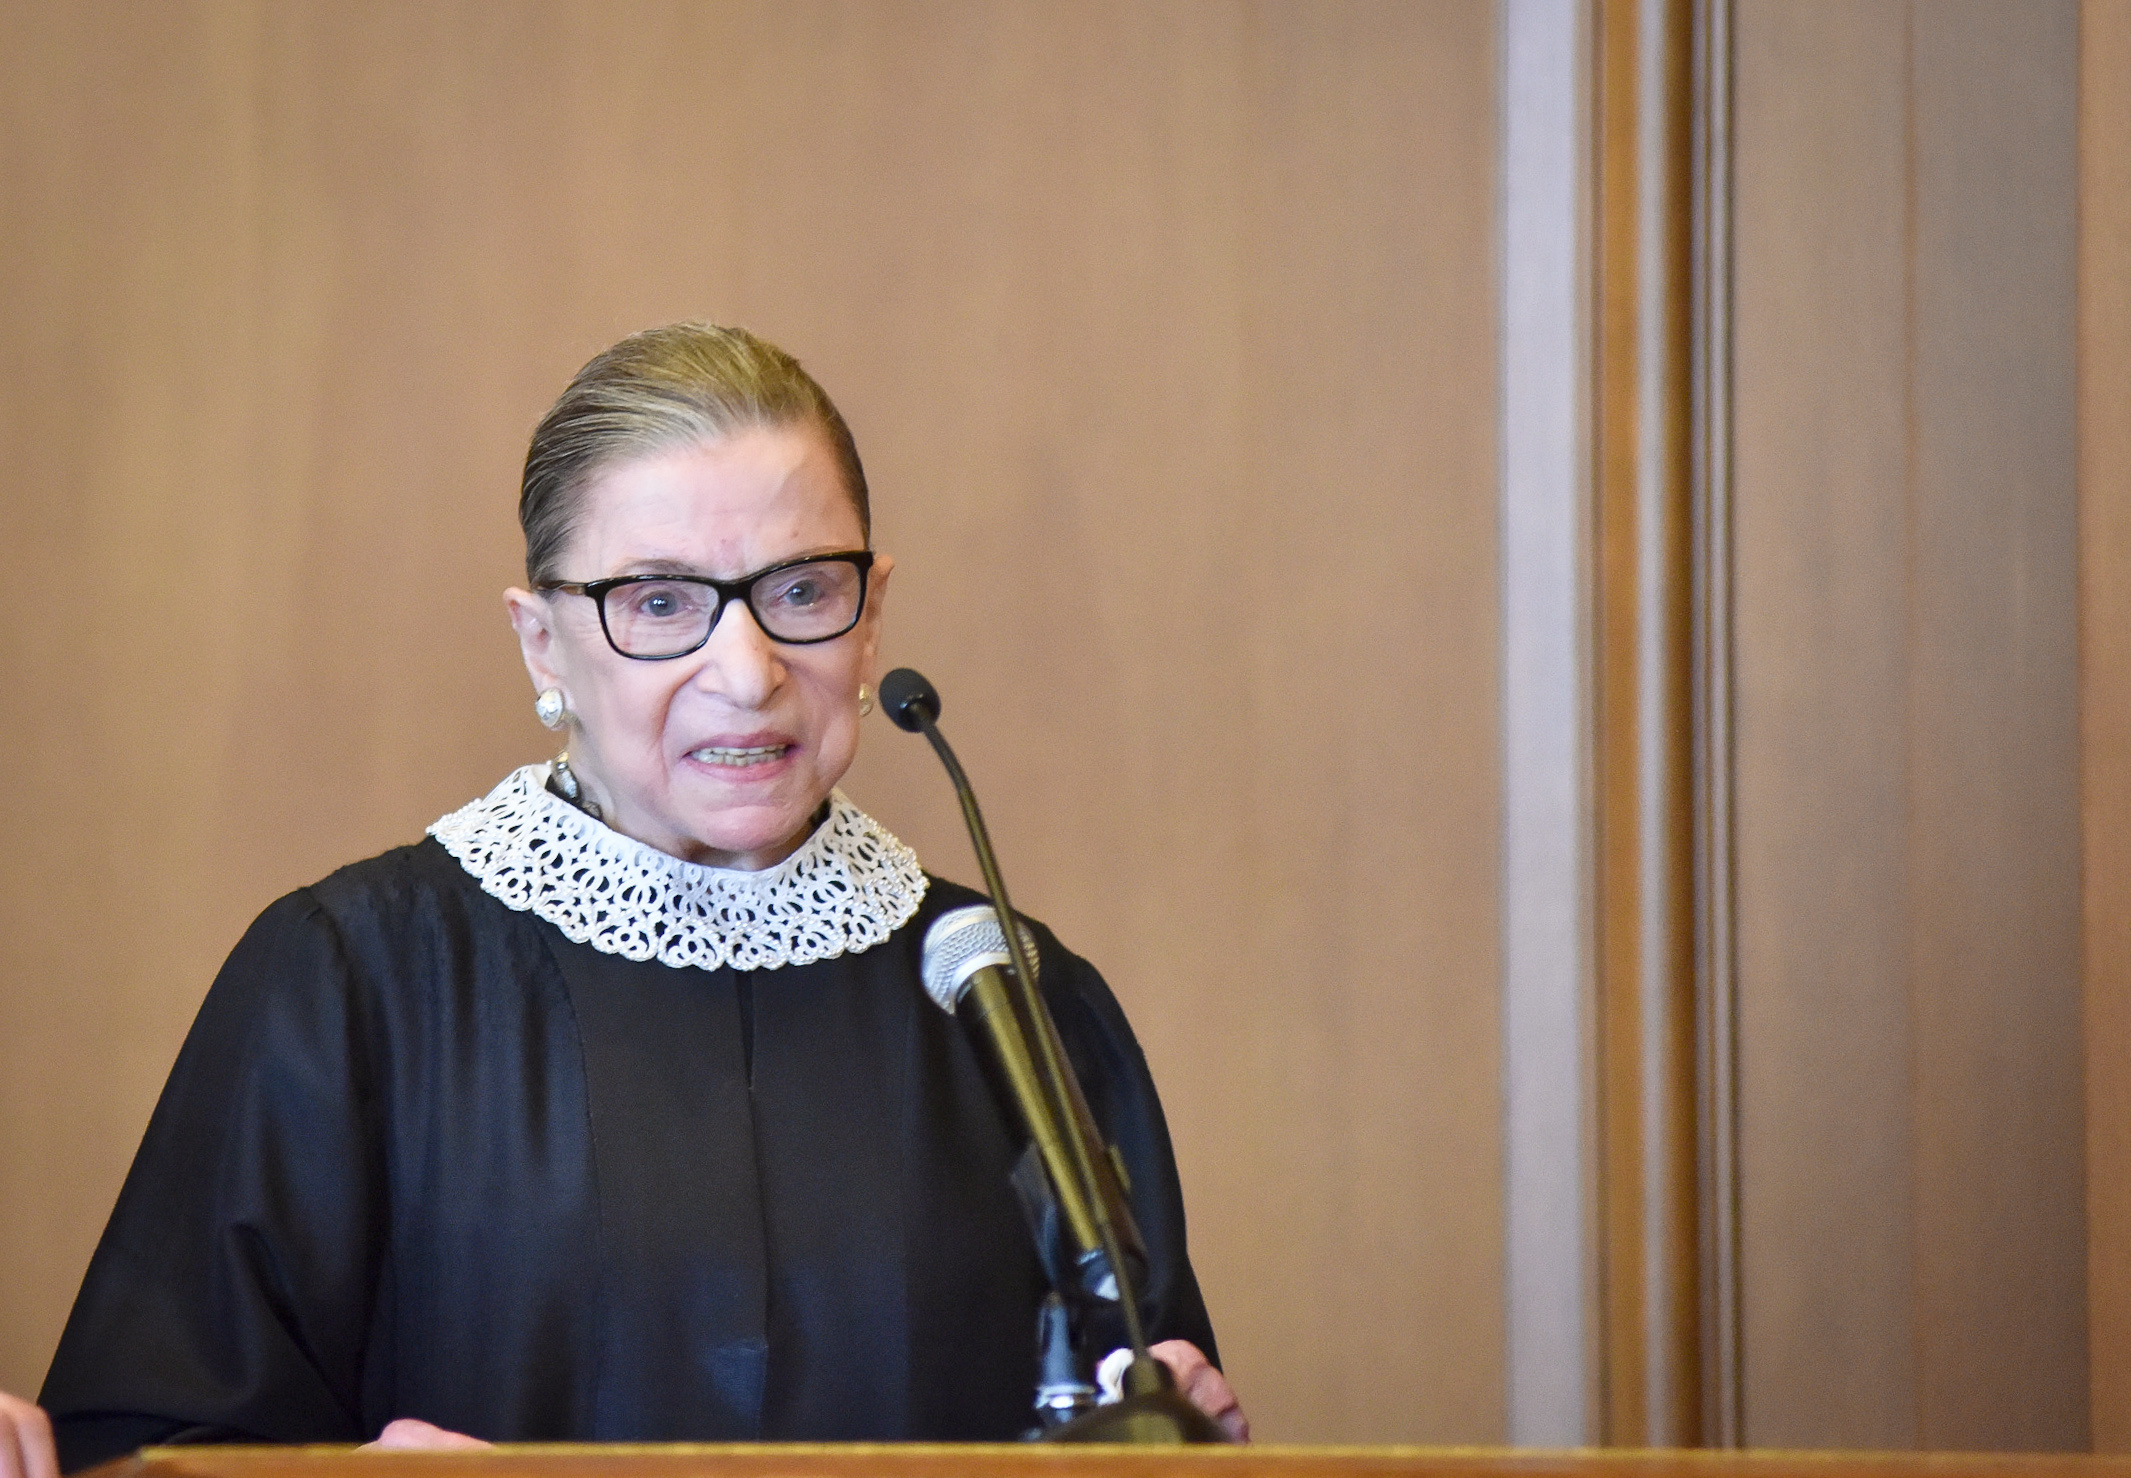 Image: Ruth Bader Ginsburg has pancreatic cancer and received radiation treatments; too bad Google and YouTube are censoring all the cancer cures that really work